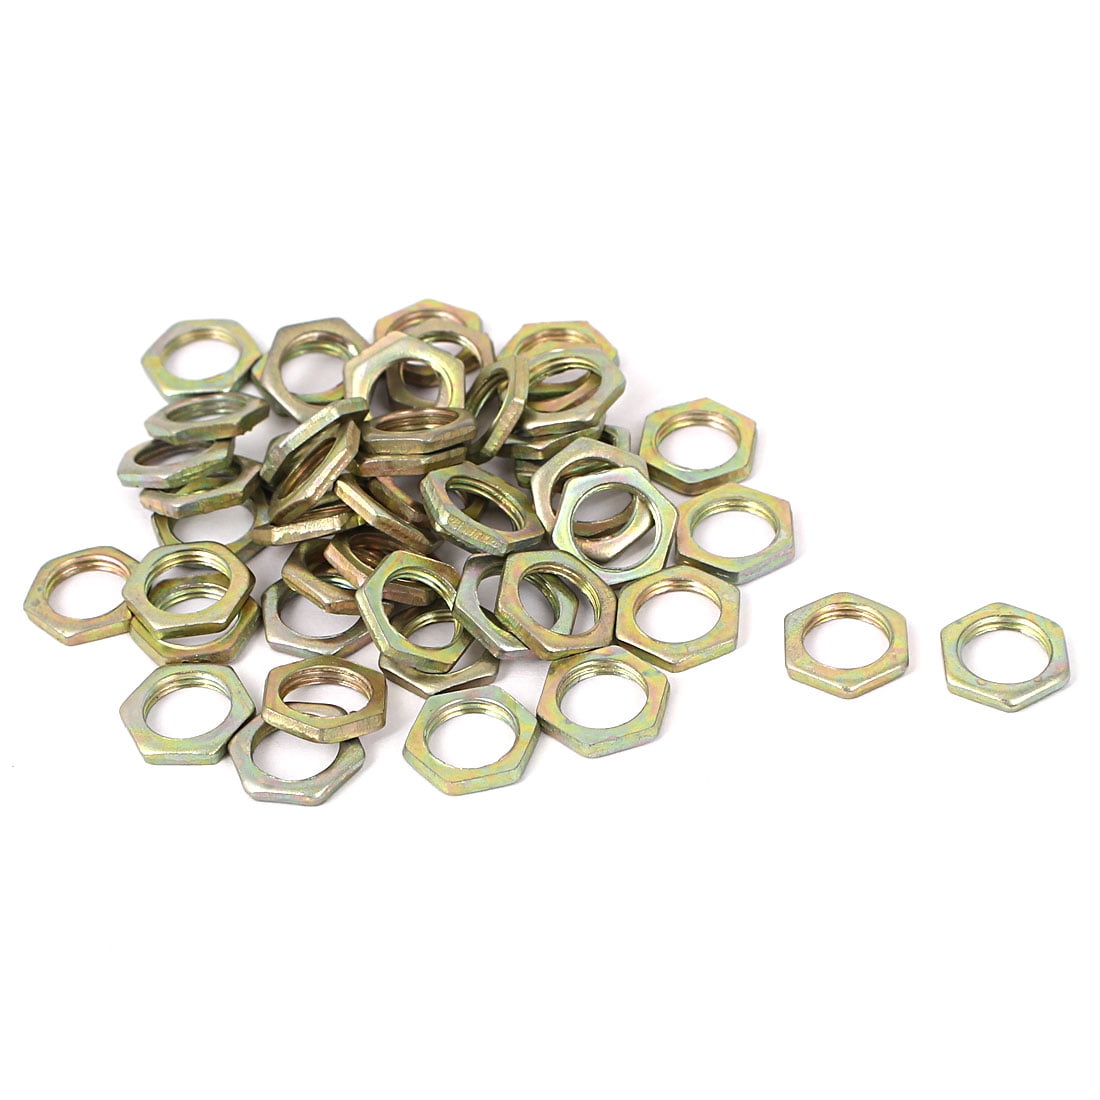 10 fine thread color galvanized carbon steel hexagon nuts for M7 M8 M9 M10 M12 M14 bolts and screws One Size BZ-M10x0.75x3